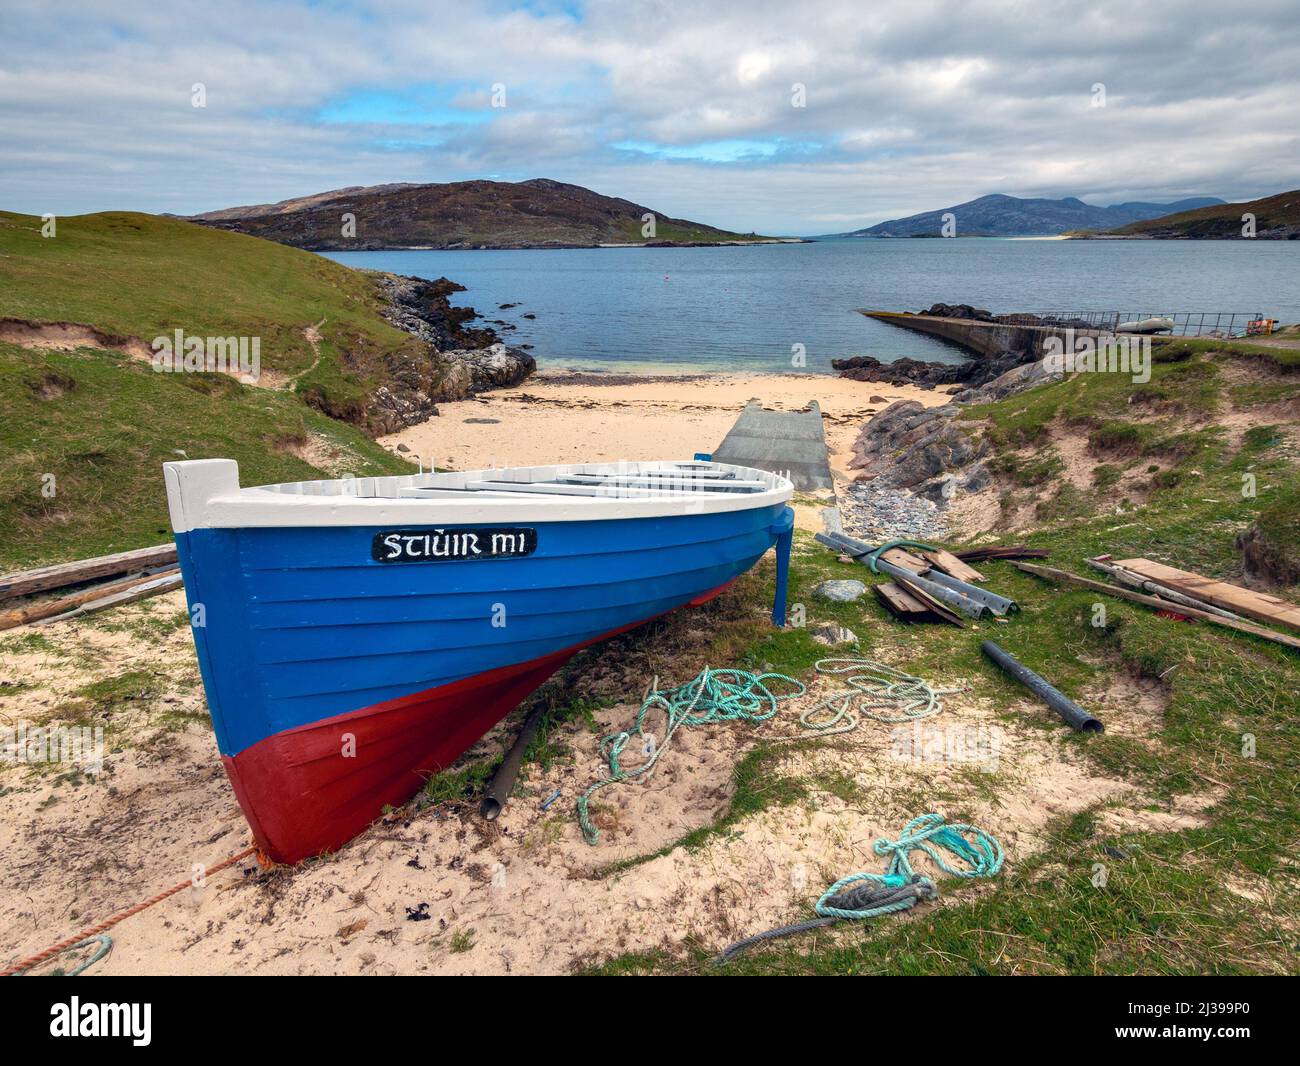 Blue wooden boat by slipway and jetty at Port a' Tuath, Huisinish with Caolas an Scarp and the Island of Scarp beyond, Isle of Harris, Scotland, UK Stock Photo